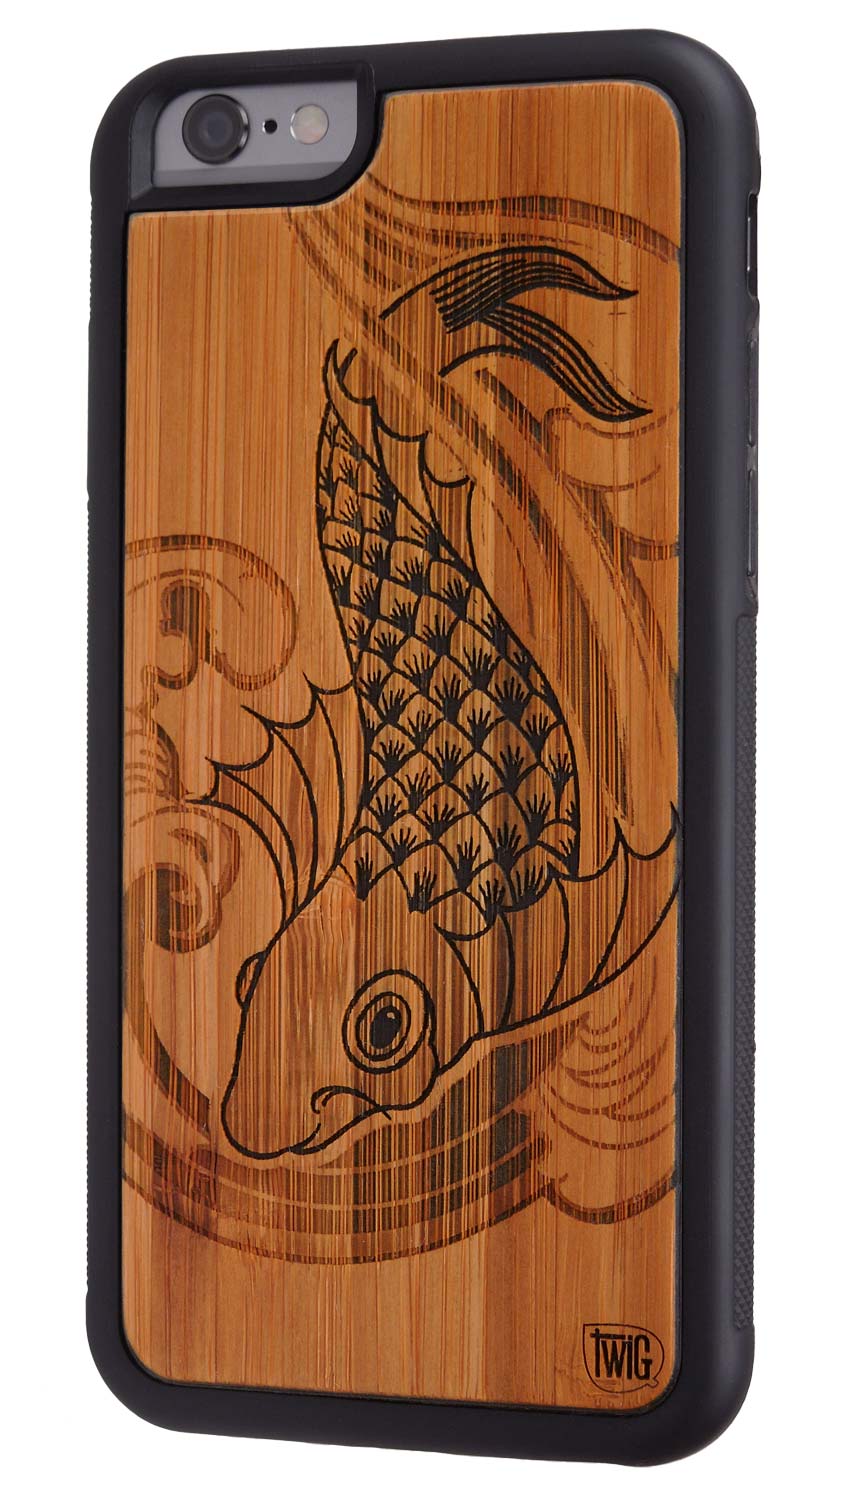 Day Koi - Bamboo iPhone Case, iPhone Case - Twig Case Co.